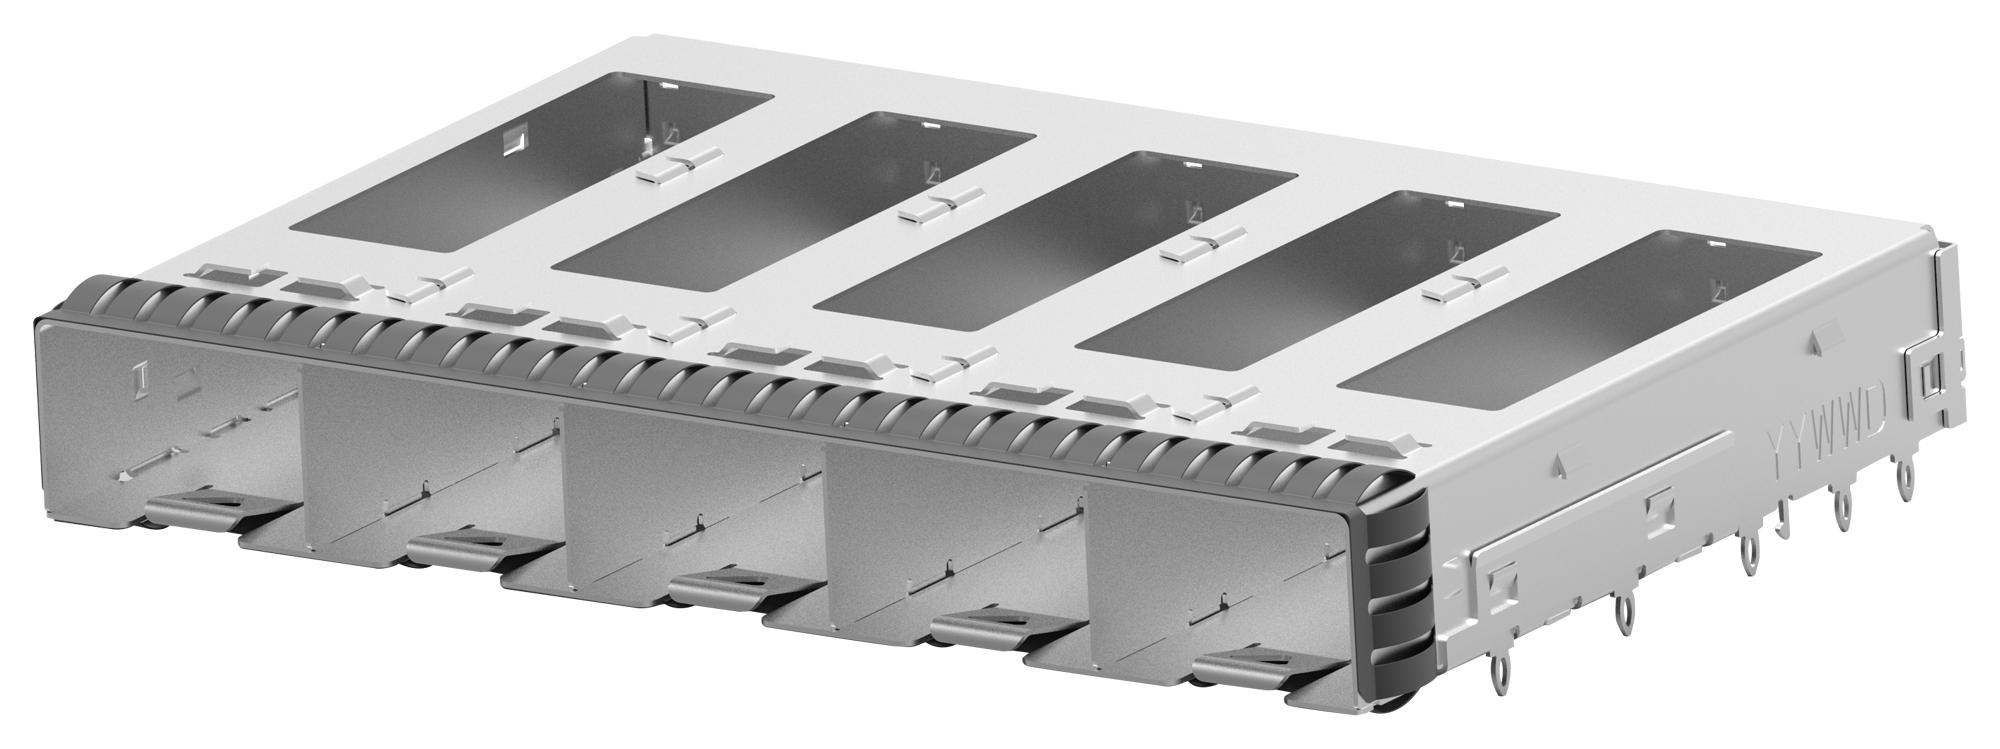 2284170-1 CAGE ASSEMBLY, SFP+, 5PORT TE CONNECTIVITY